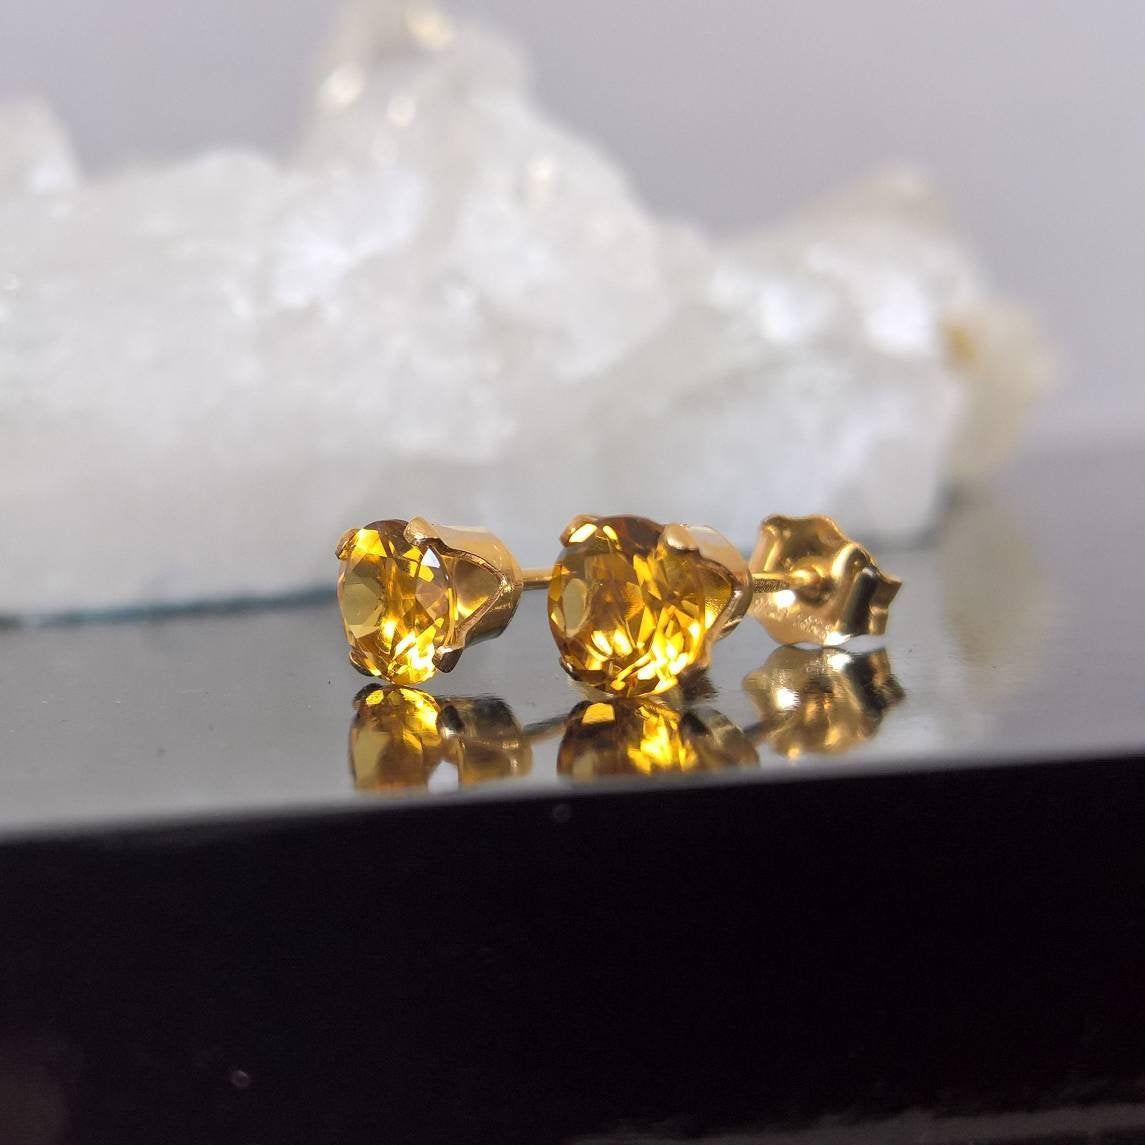 Citrine stud earrings in gold fill - 5mm or 6mm